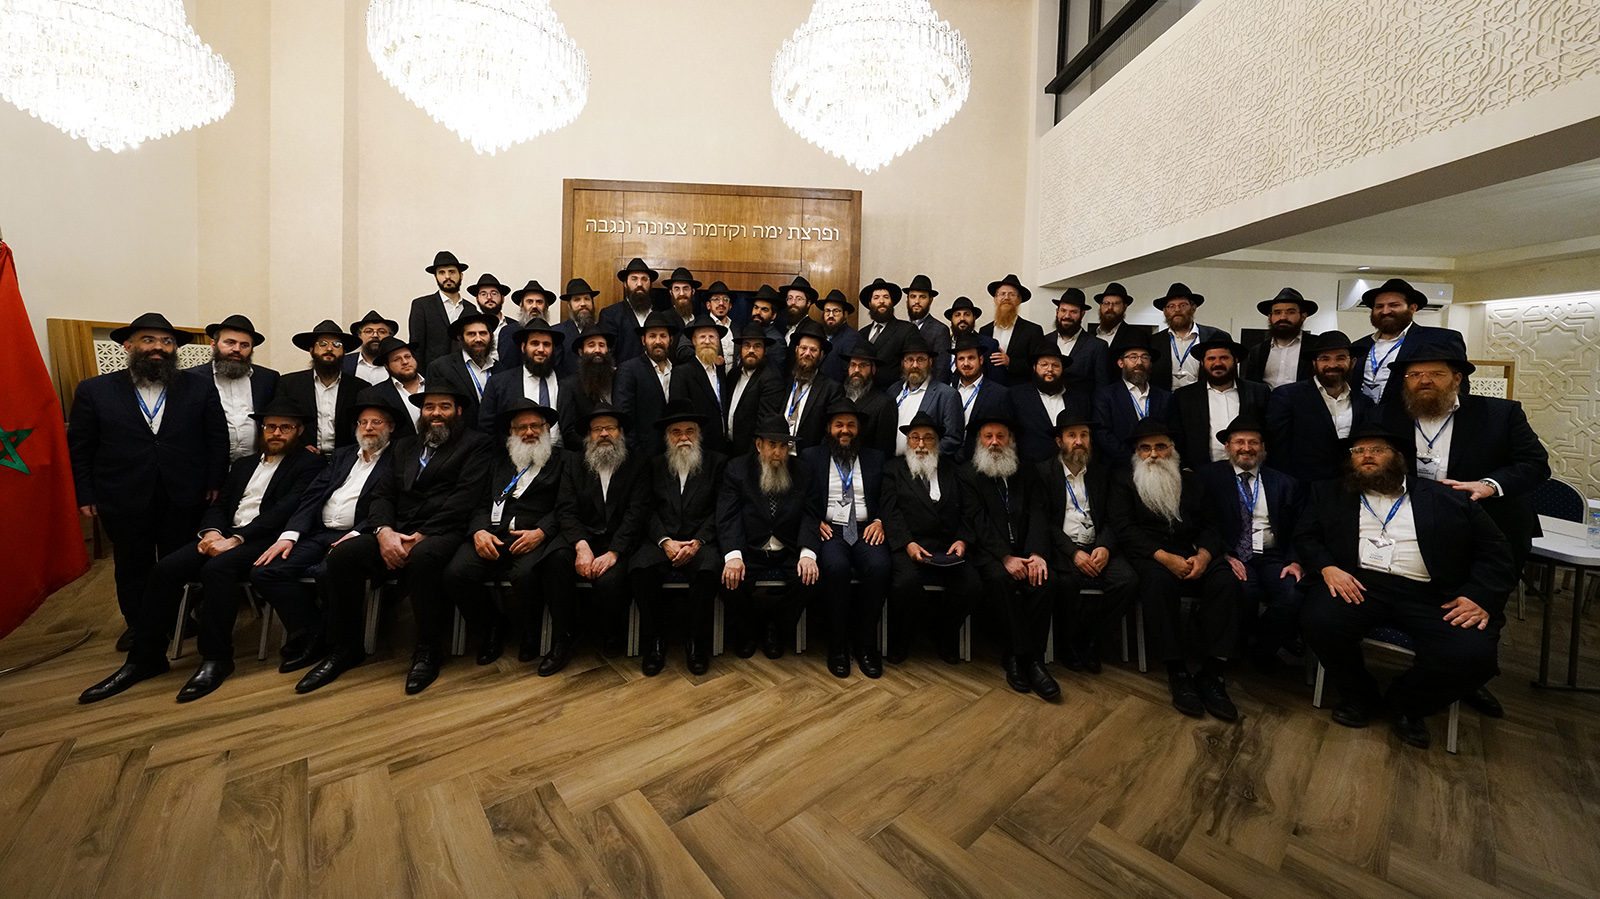 Participants in a Chabad-Lubavitch Hasidic conference pose together in Morocco, in May 2023. Photo by Avi Winner - Merkos 302/Chabad.org